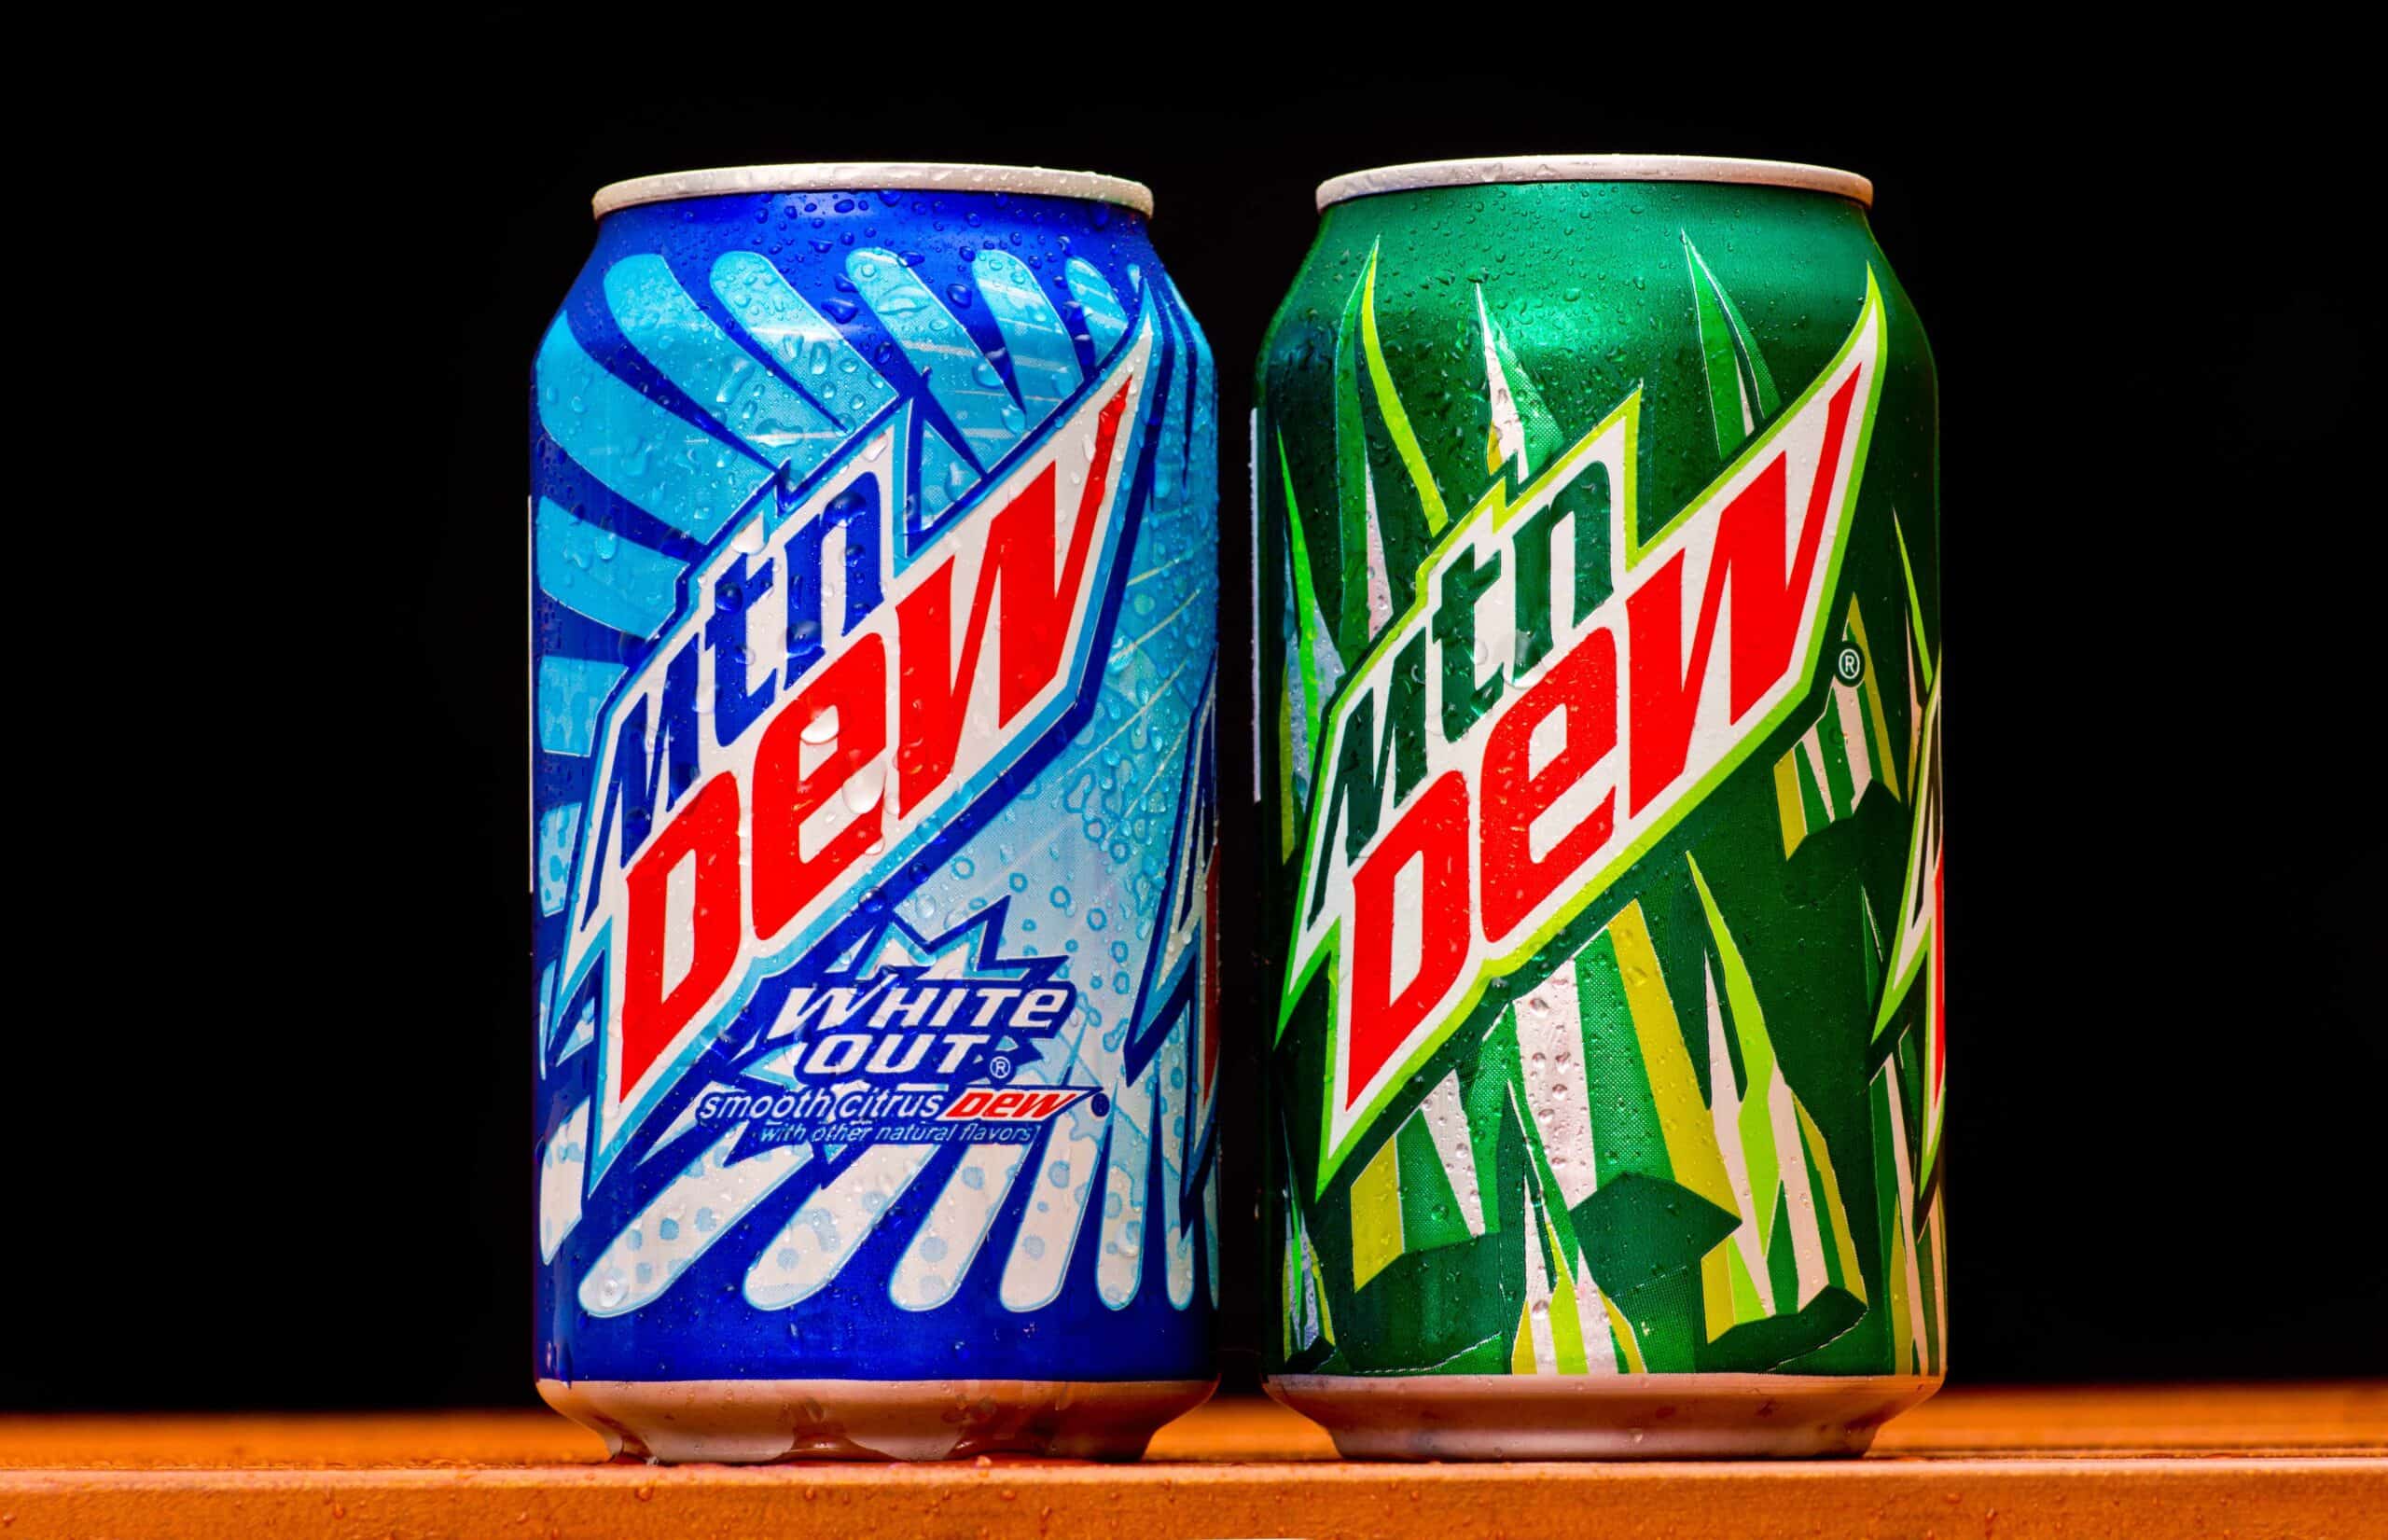    Mountain Dew can splashed with water on black background, product shot